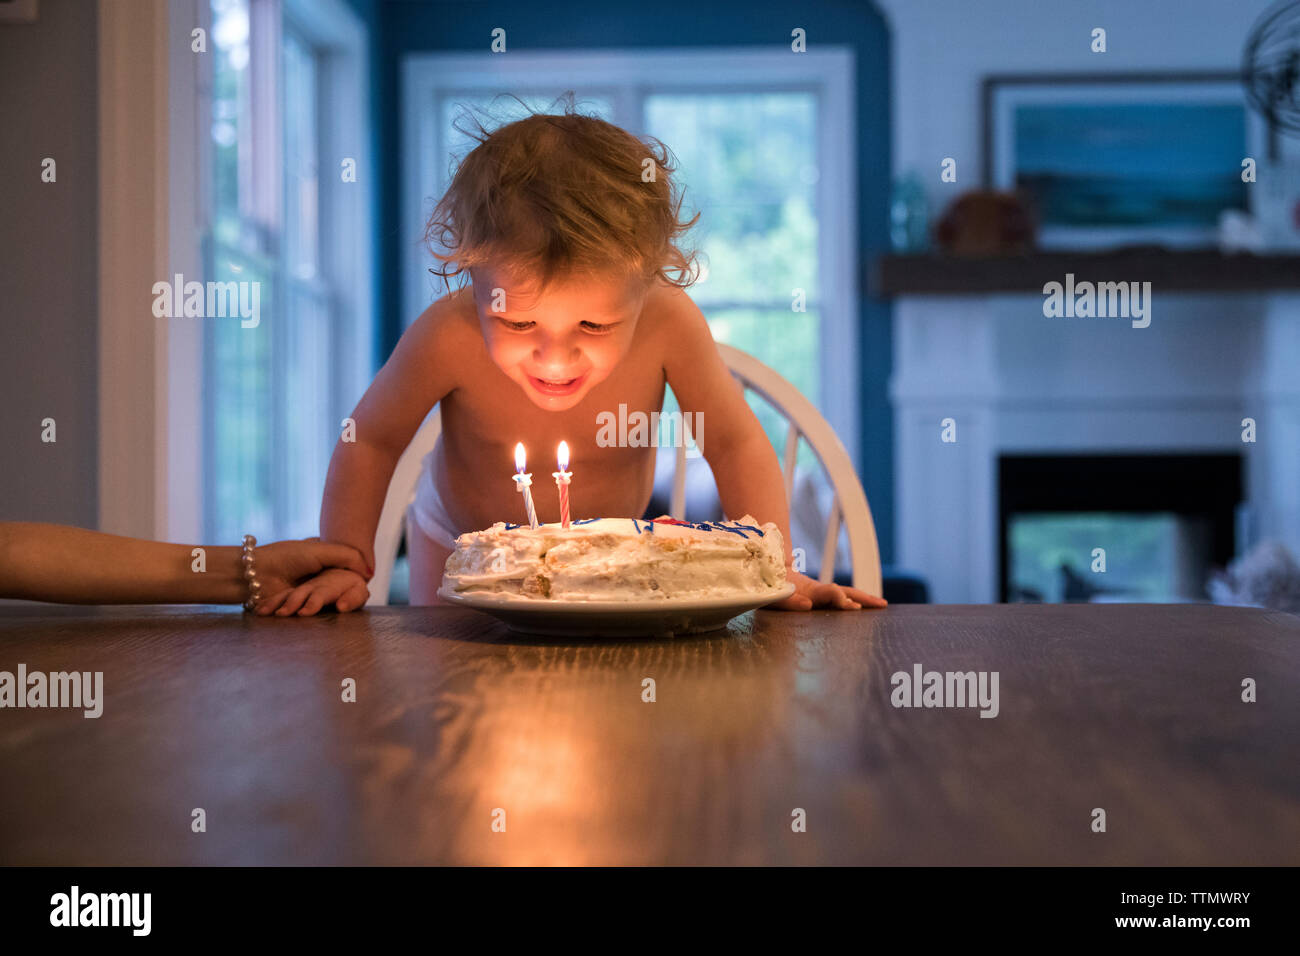 Candlelit Toddler Boy Blowing Out Candles on Birthday Cake Stock Photo ...